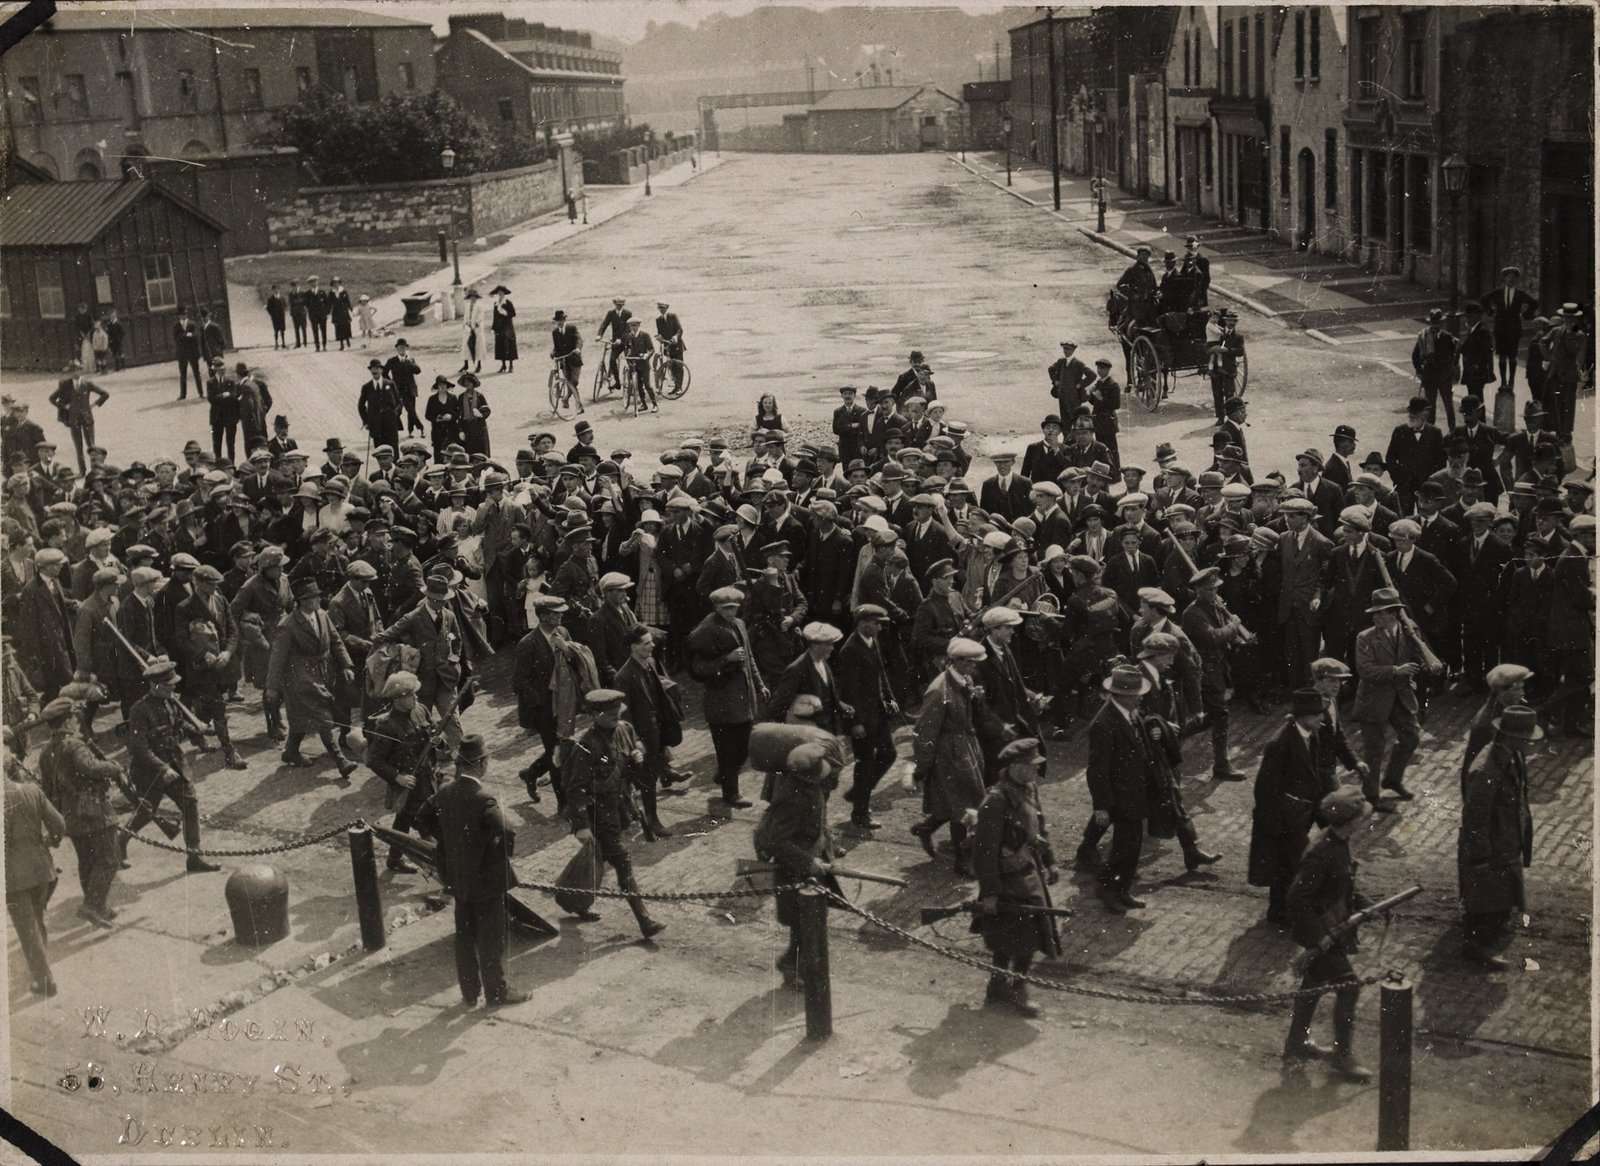 Image - Anti-Treaty prisoners captured during the attack on Passage West being marched to the Cork Gaol for detention. Image courtesy of the National Library of Ireland